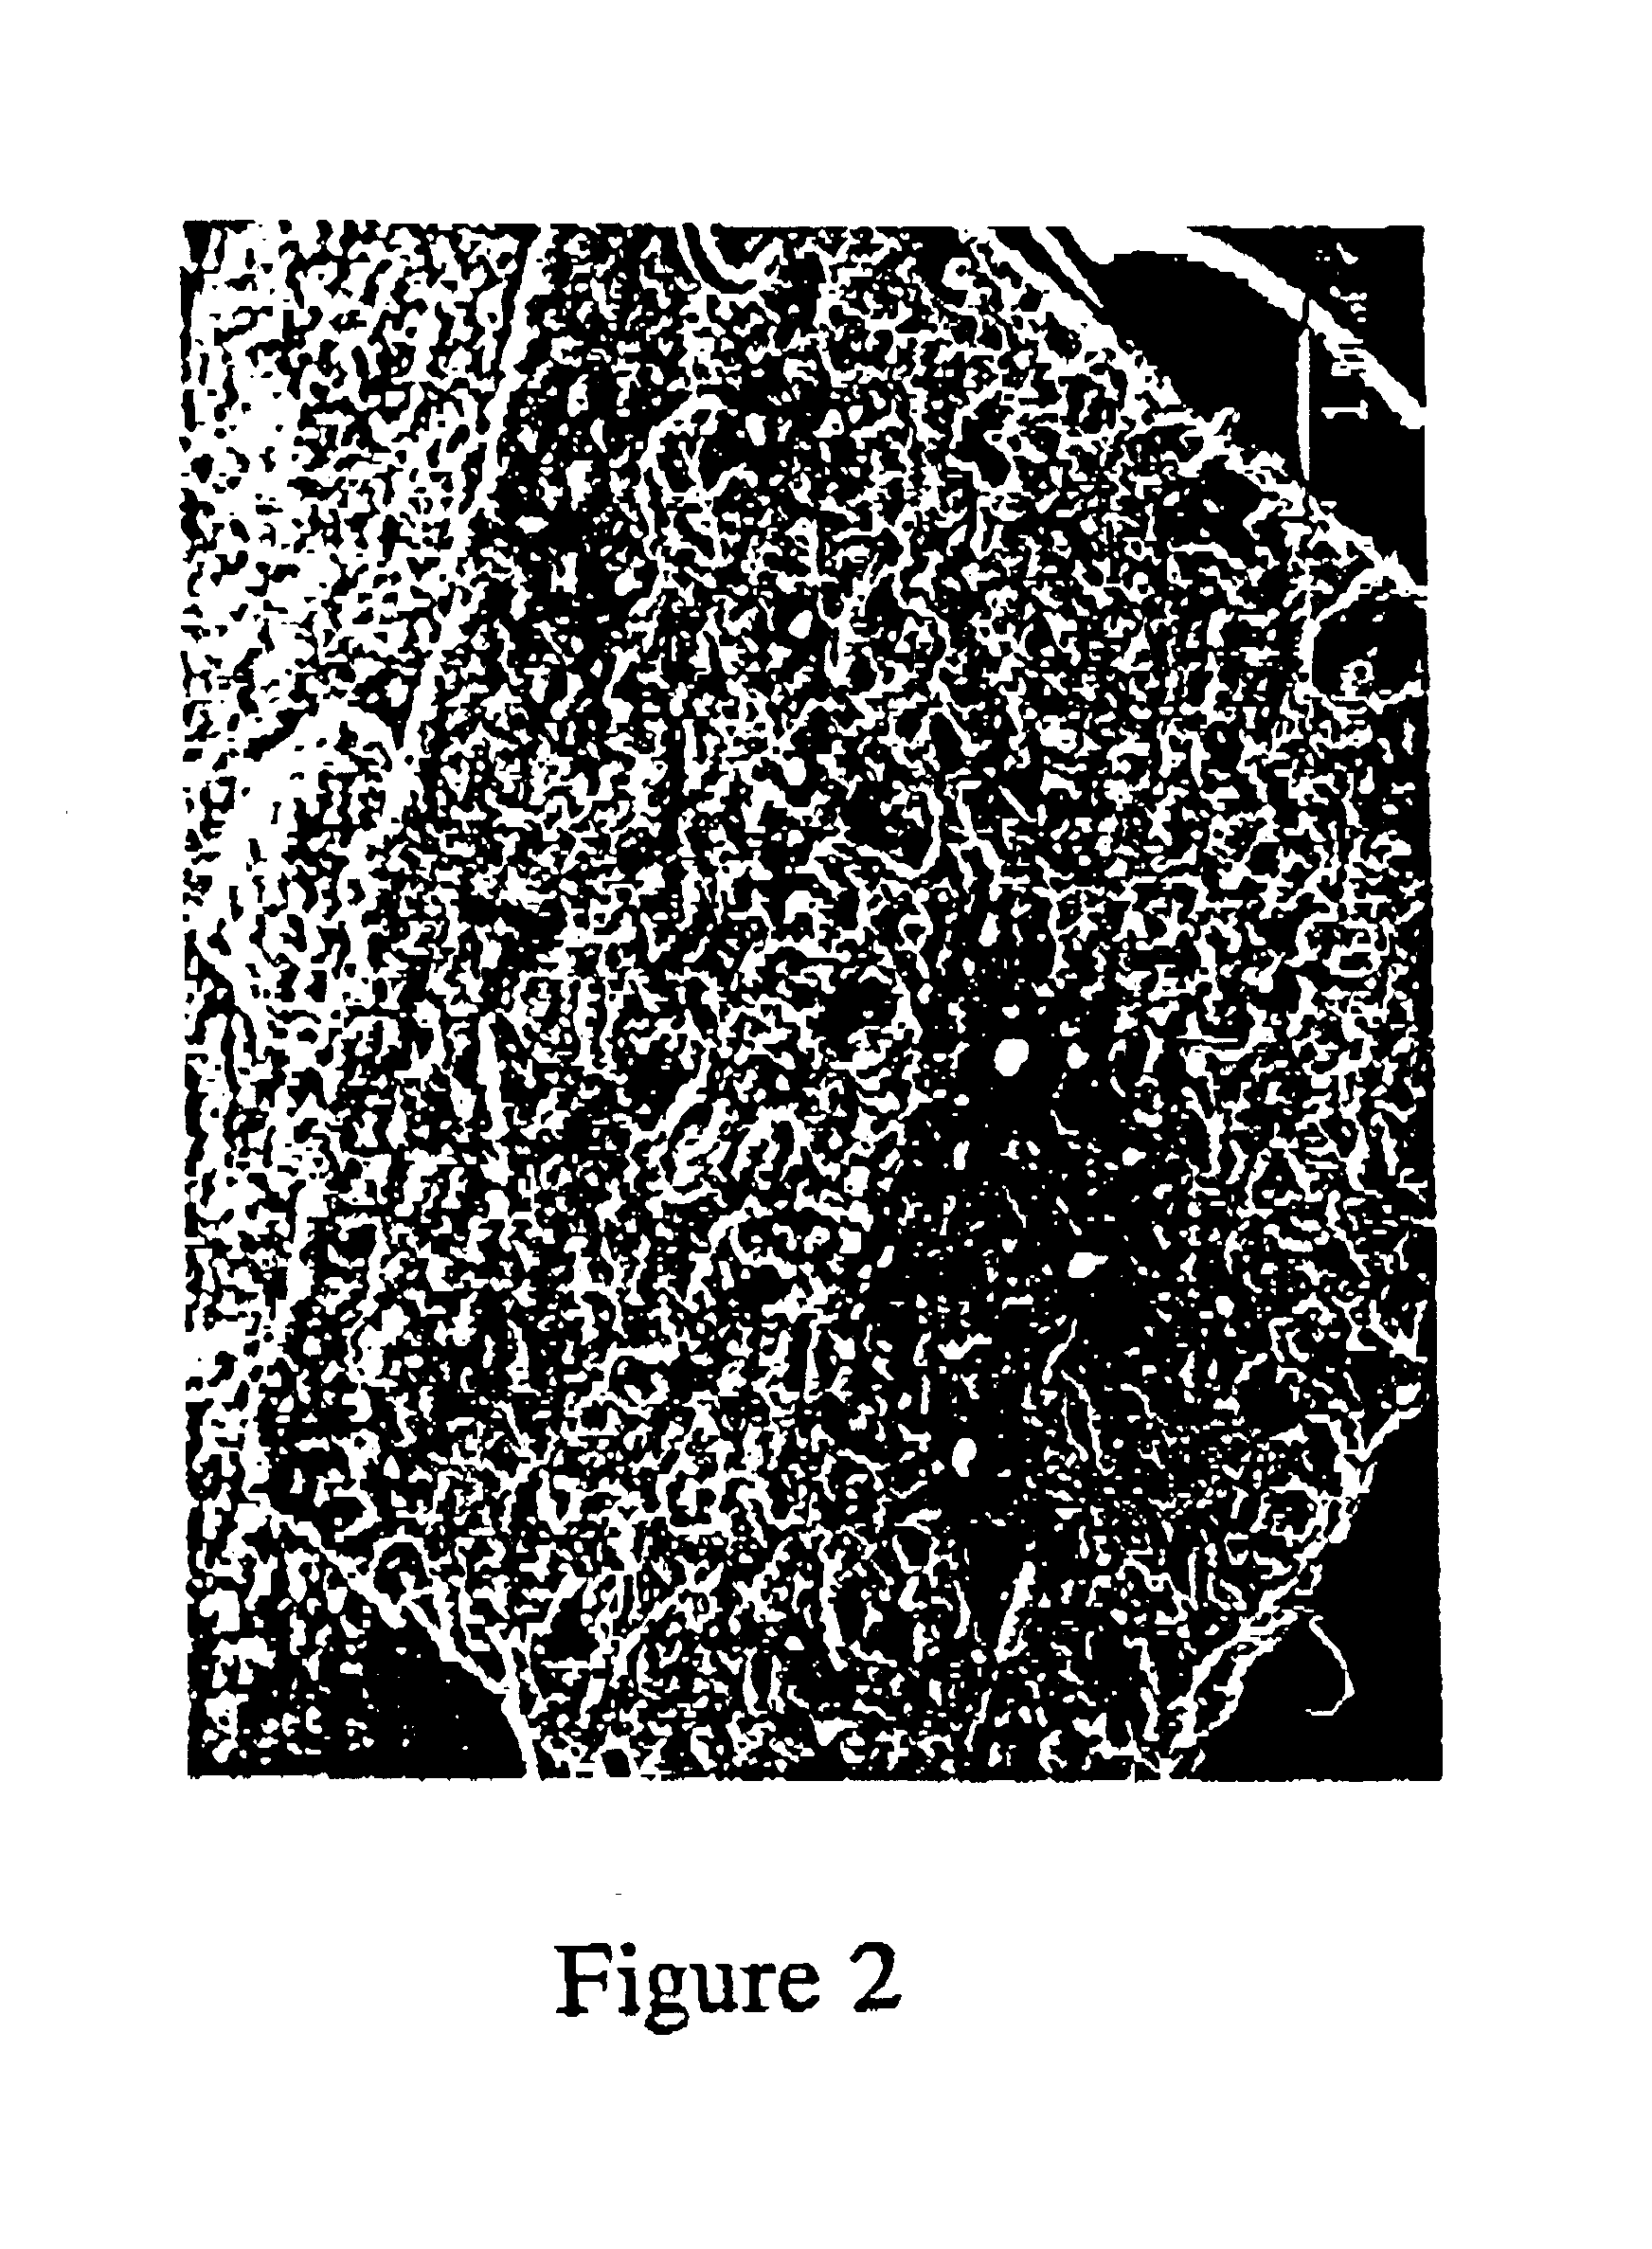 Thermoplastic polymer propellant compositions